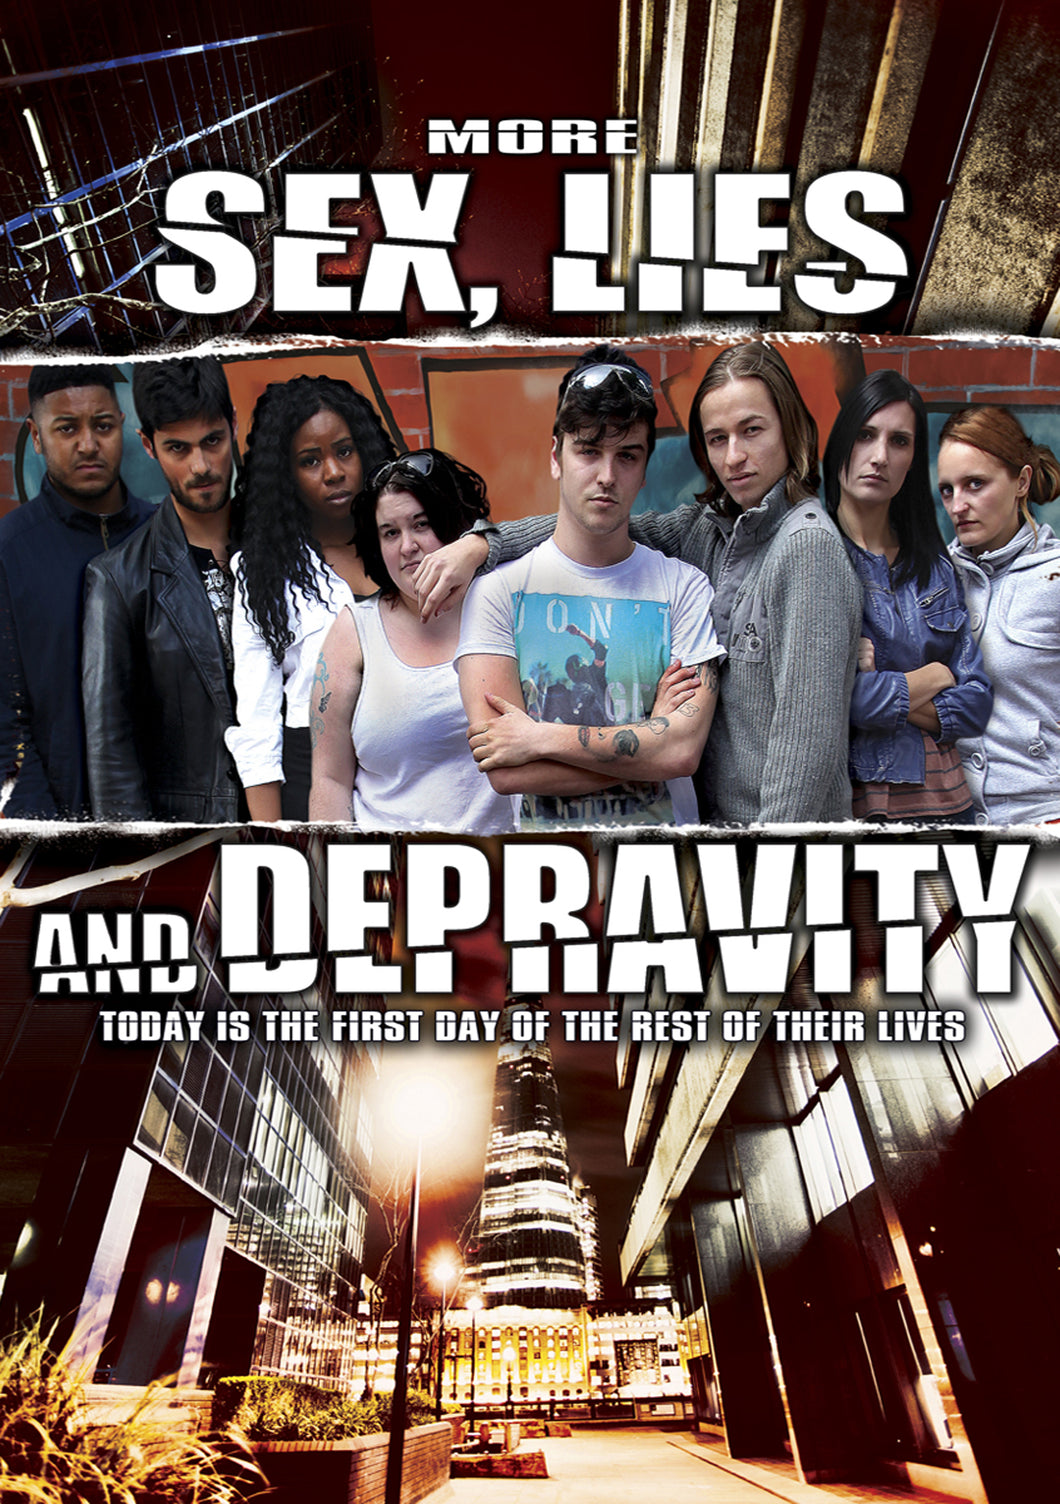 More Sex, Lies And Depravity (DVD)